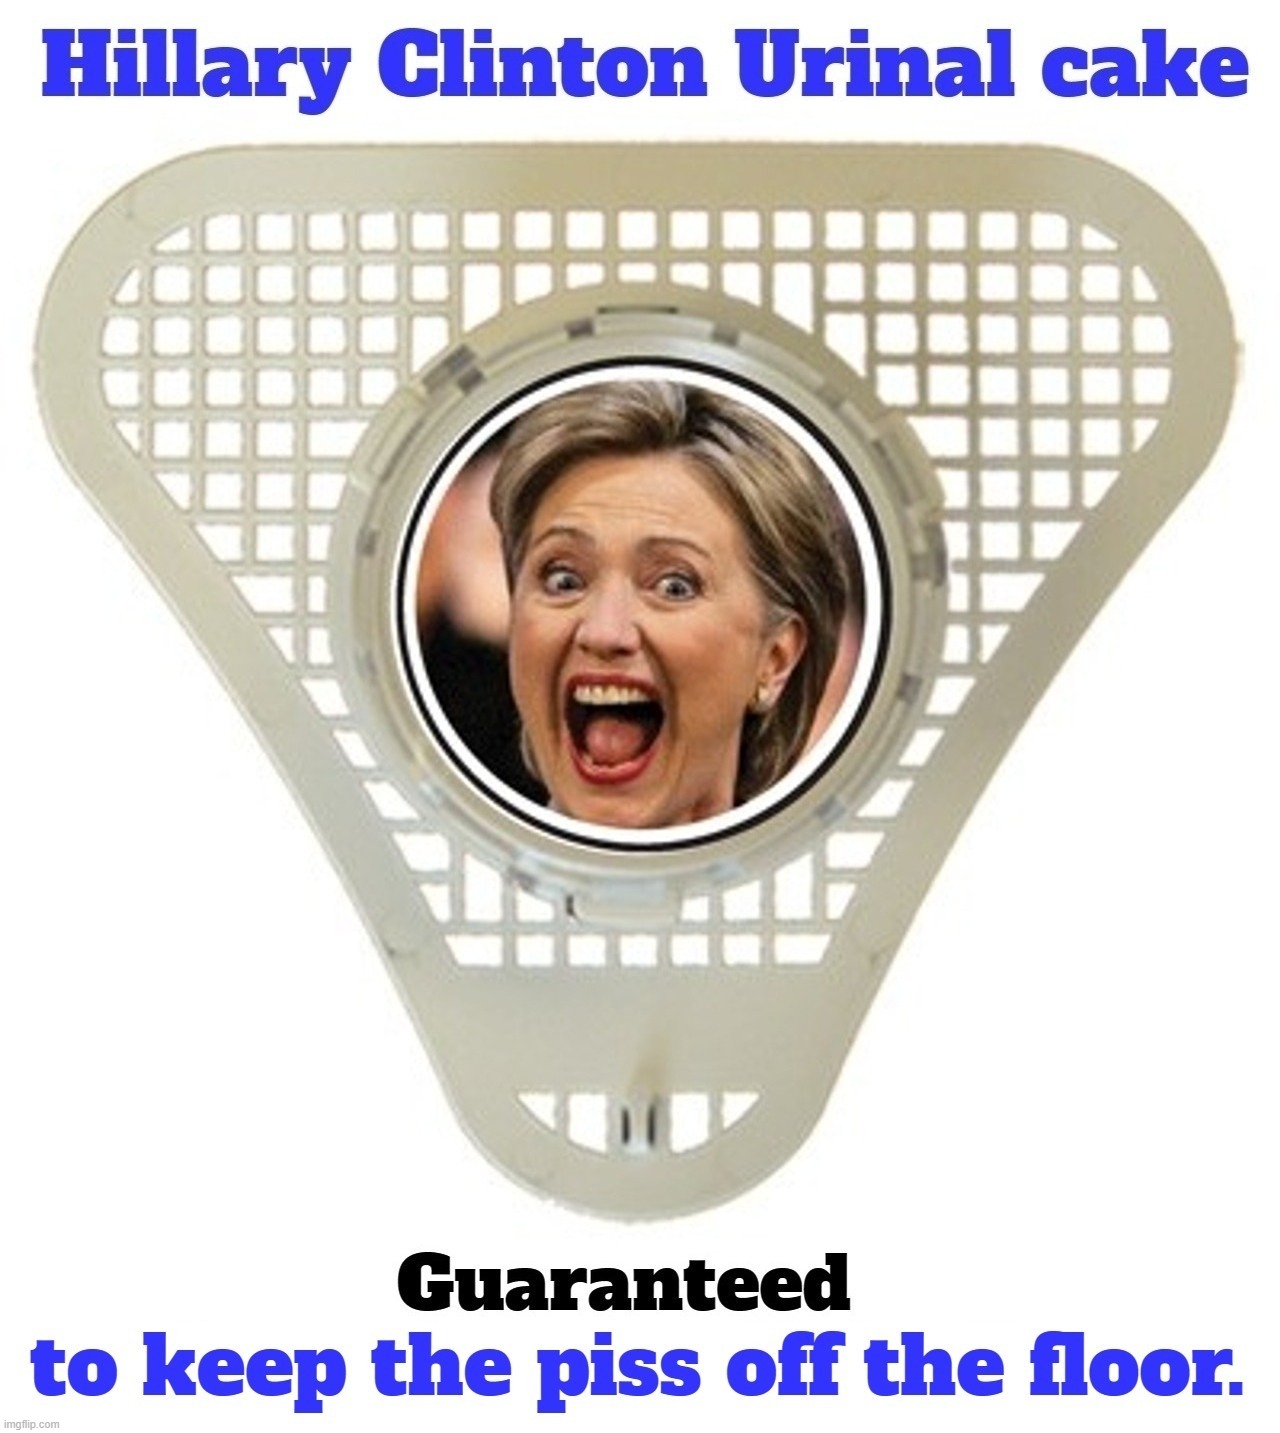 Get Your Crooked Hillary Urinal cake! | image tagged in crooked hillary,urinal guy,urinal,urinal target,urinal guy more text room,piss on you | made w/ Imgflip meme maker